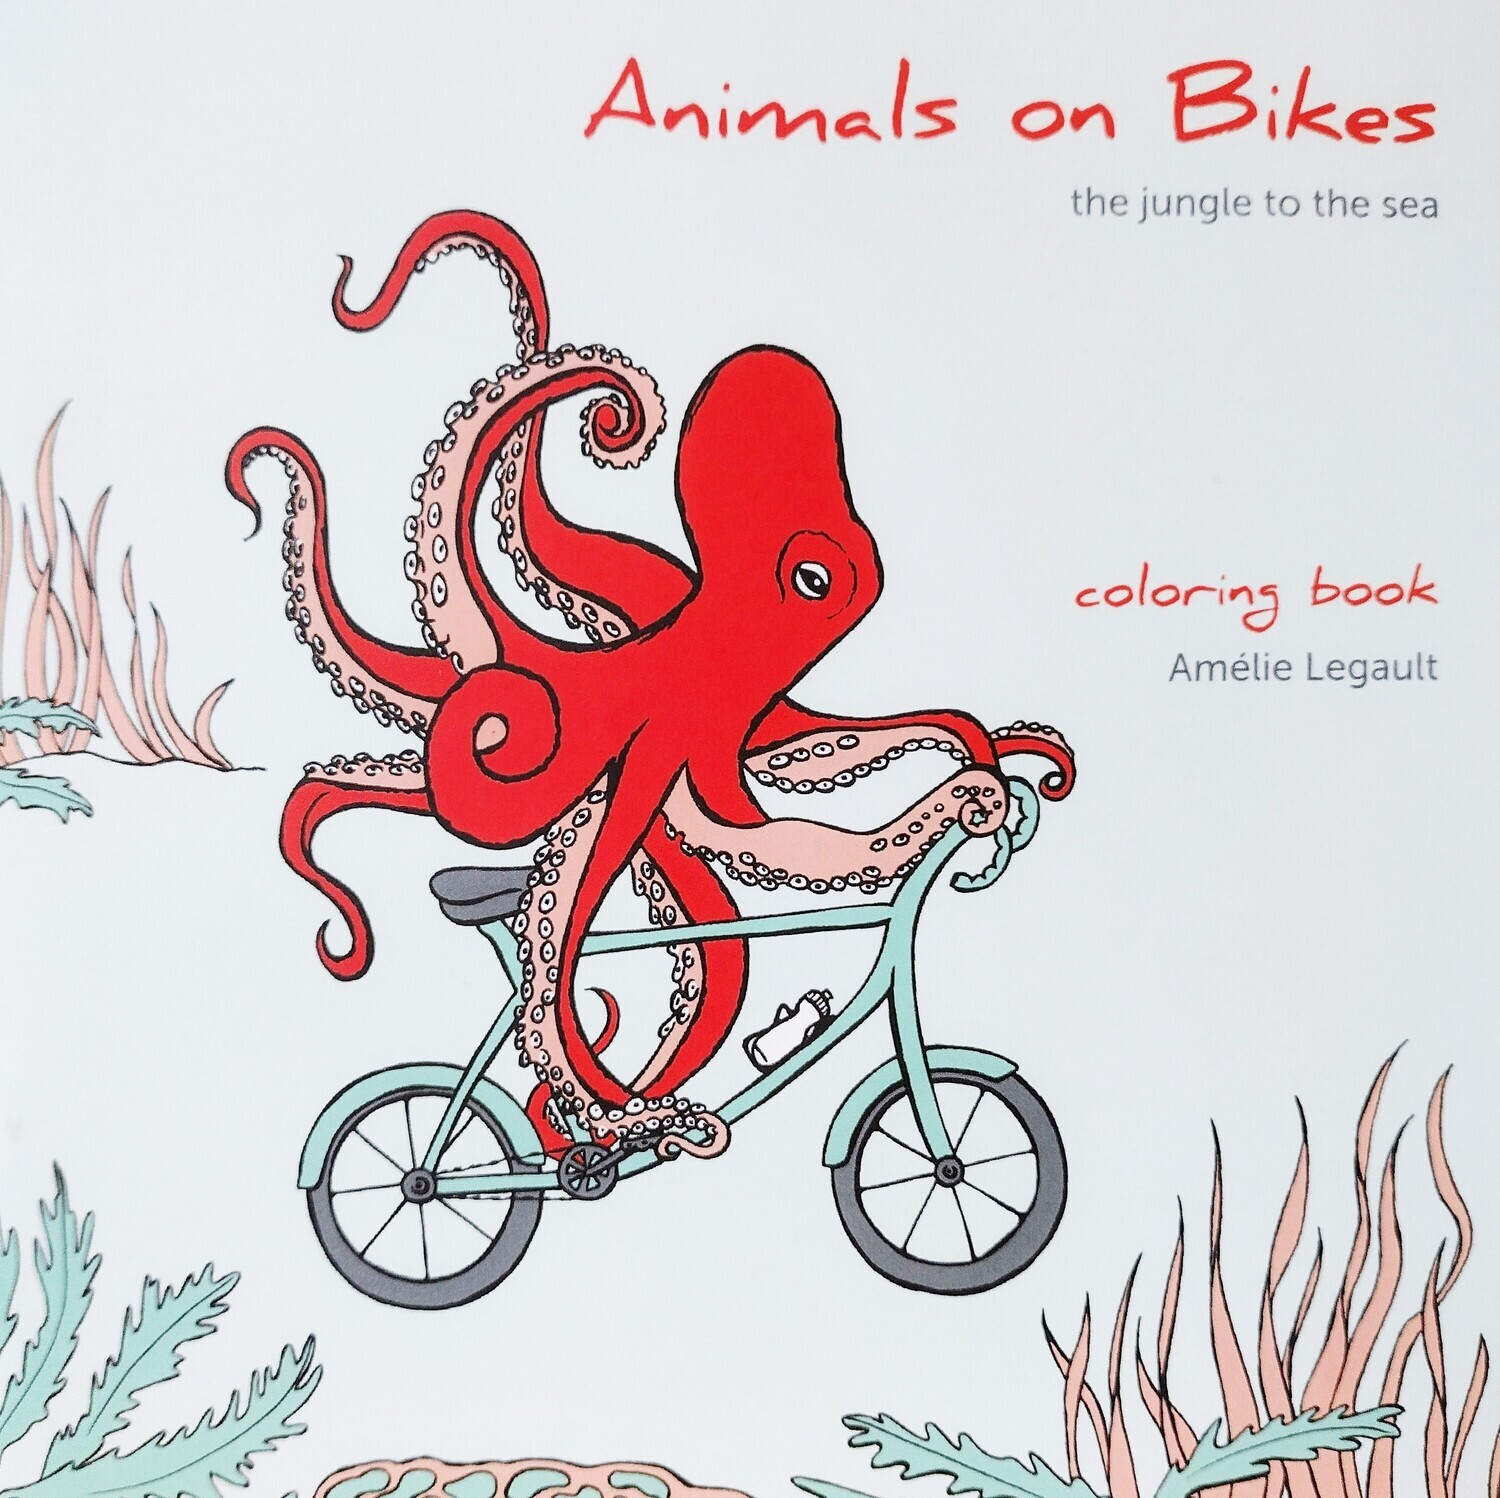 Animals on Bikes: The Jungle to the Sea - Coloring Book by Amelie Legault